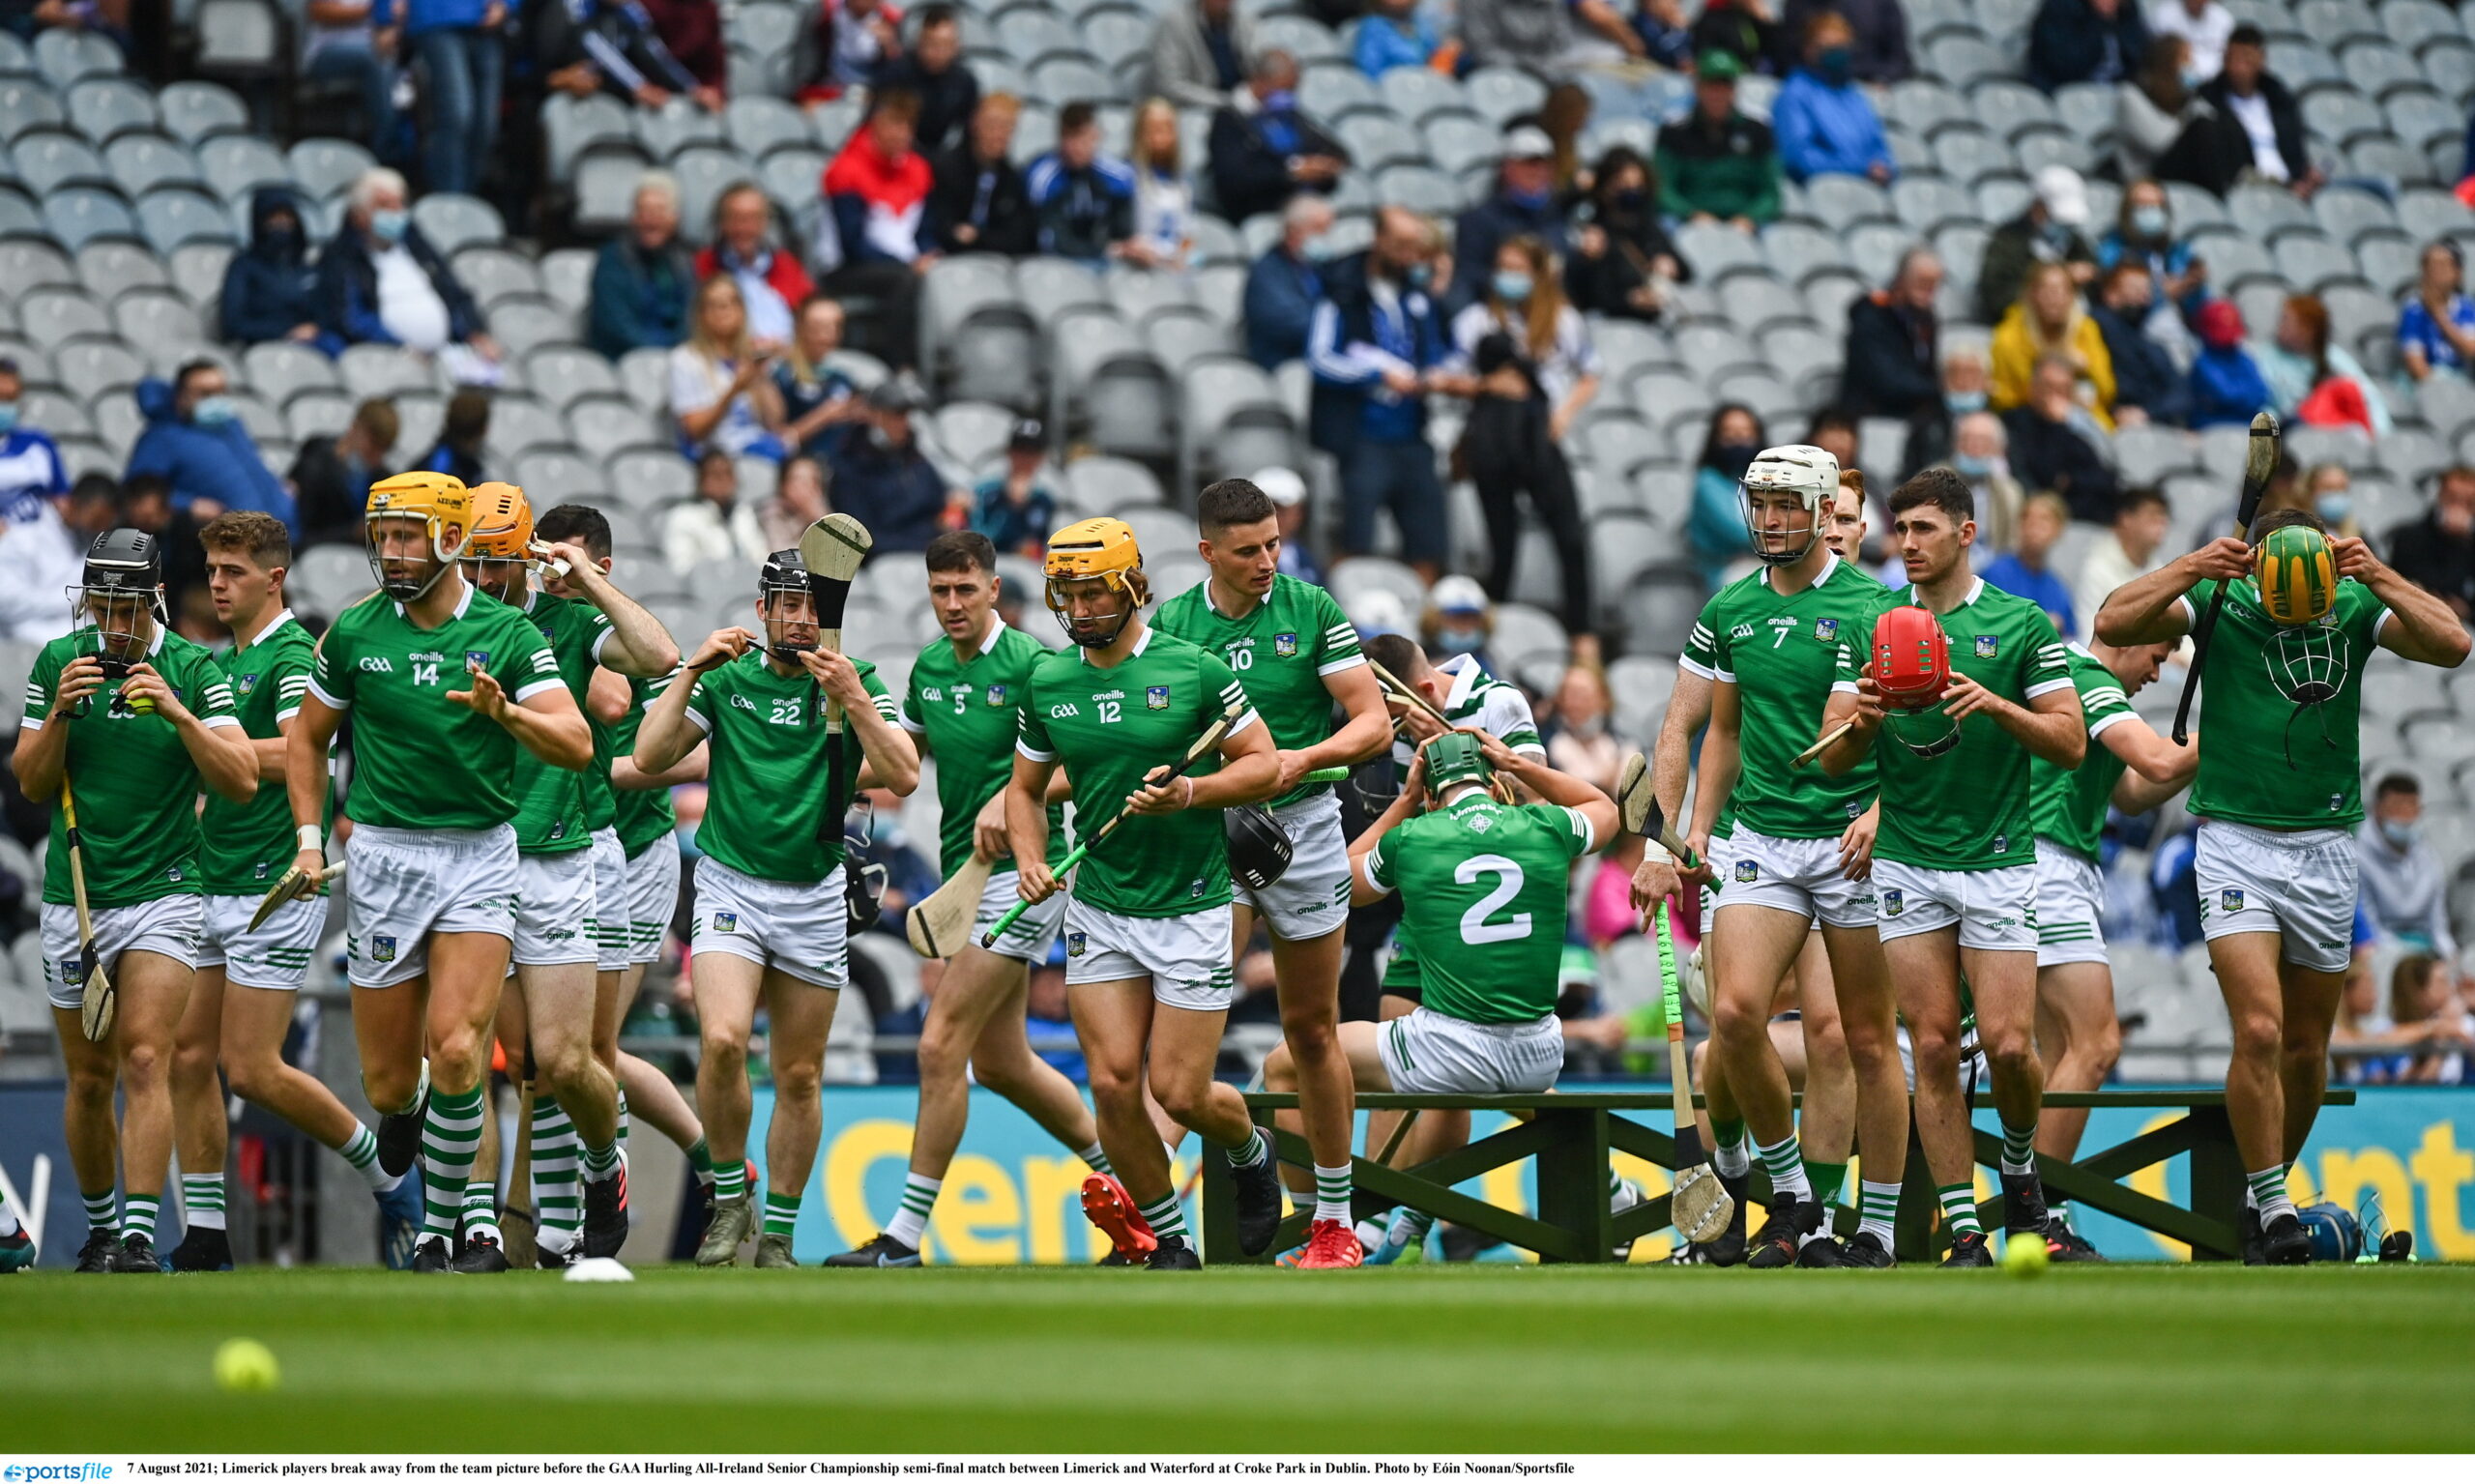 A jam-packed Sunday coming up in the Allianz Football League:, Limerick GAA